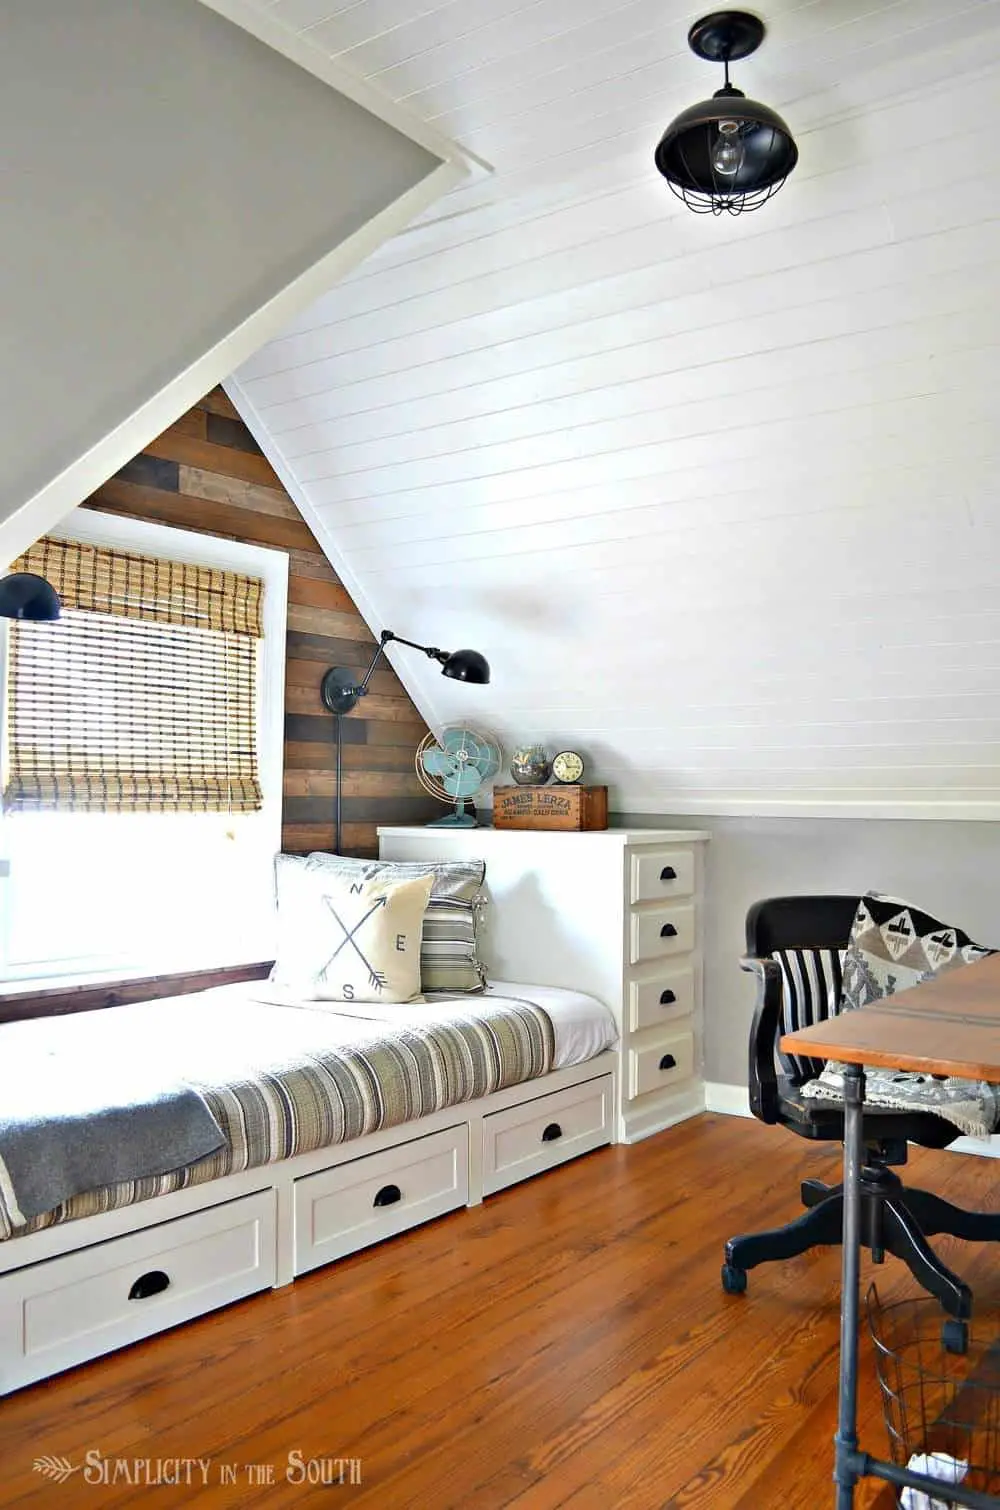 Cozy eclectic dormer bedroom with a built in bed and planked wall and ceilings